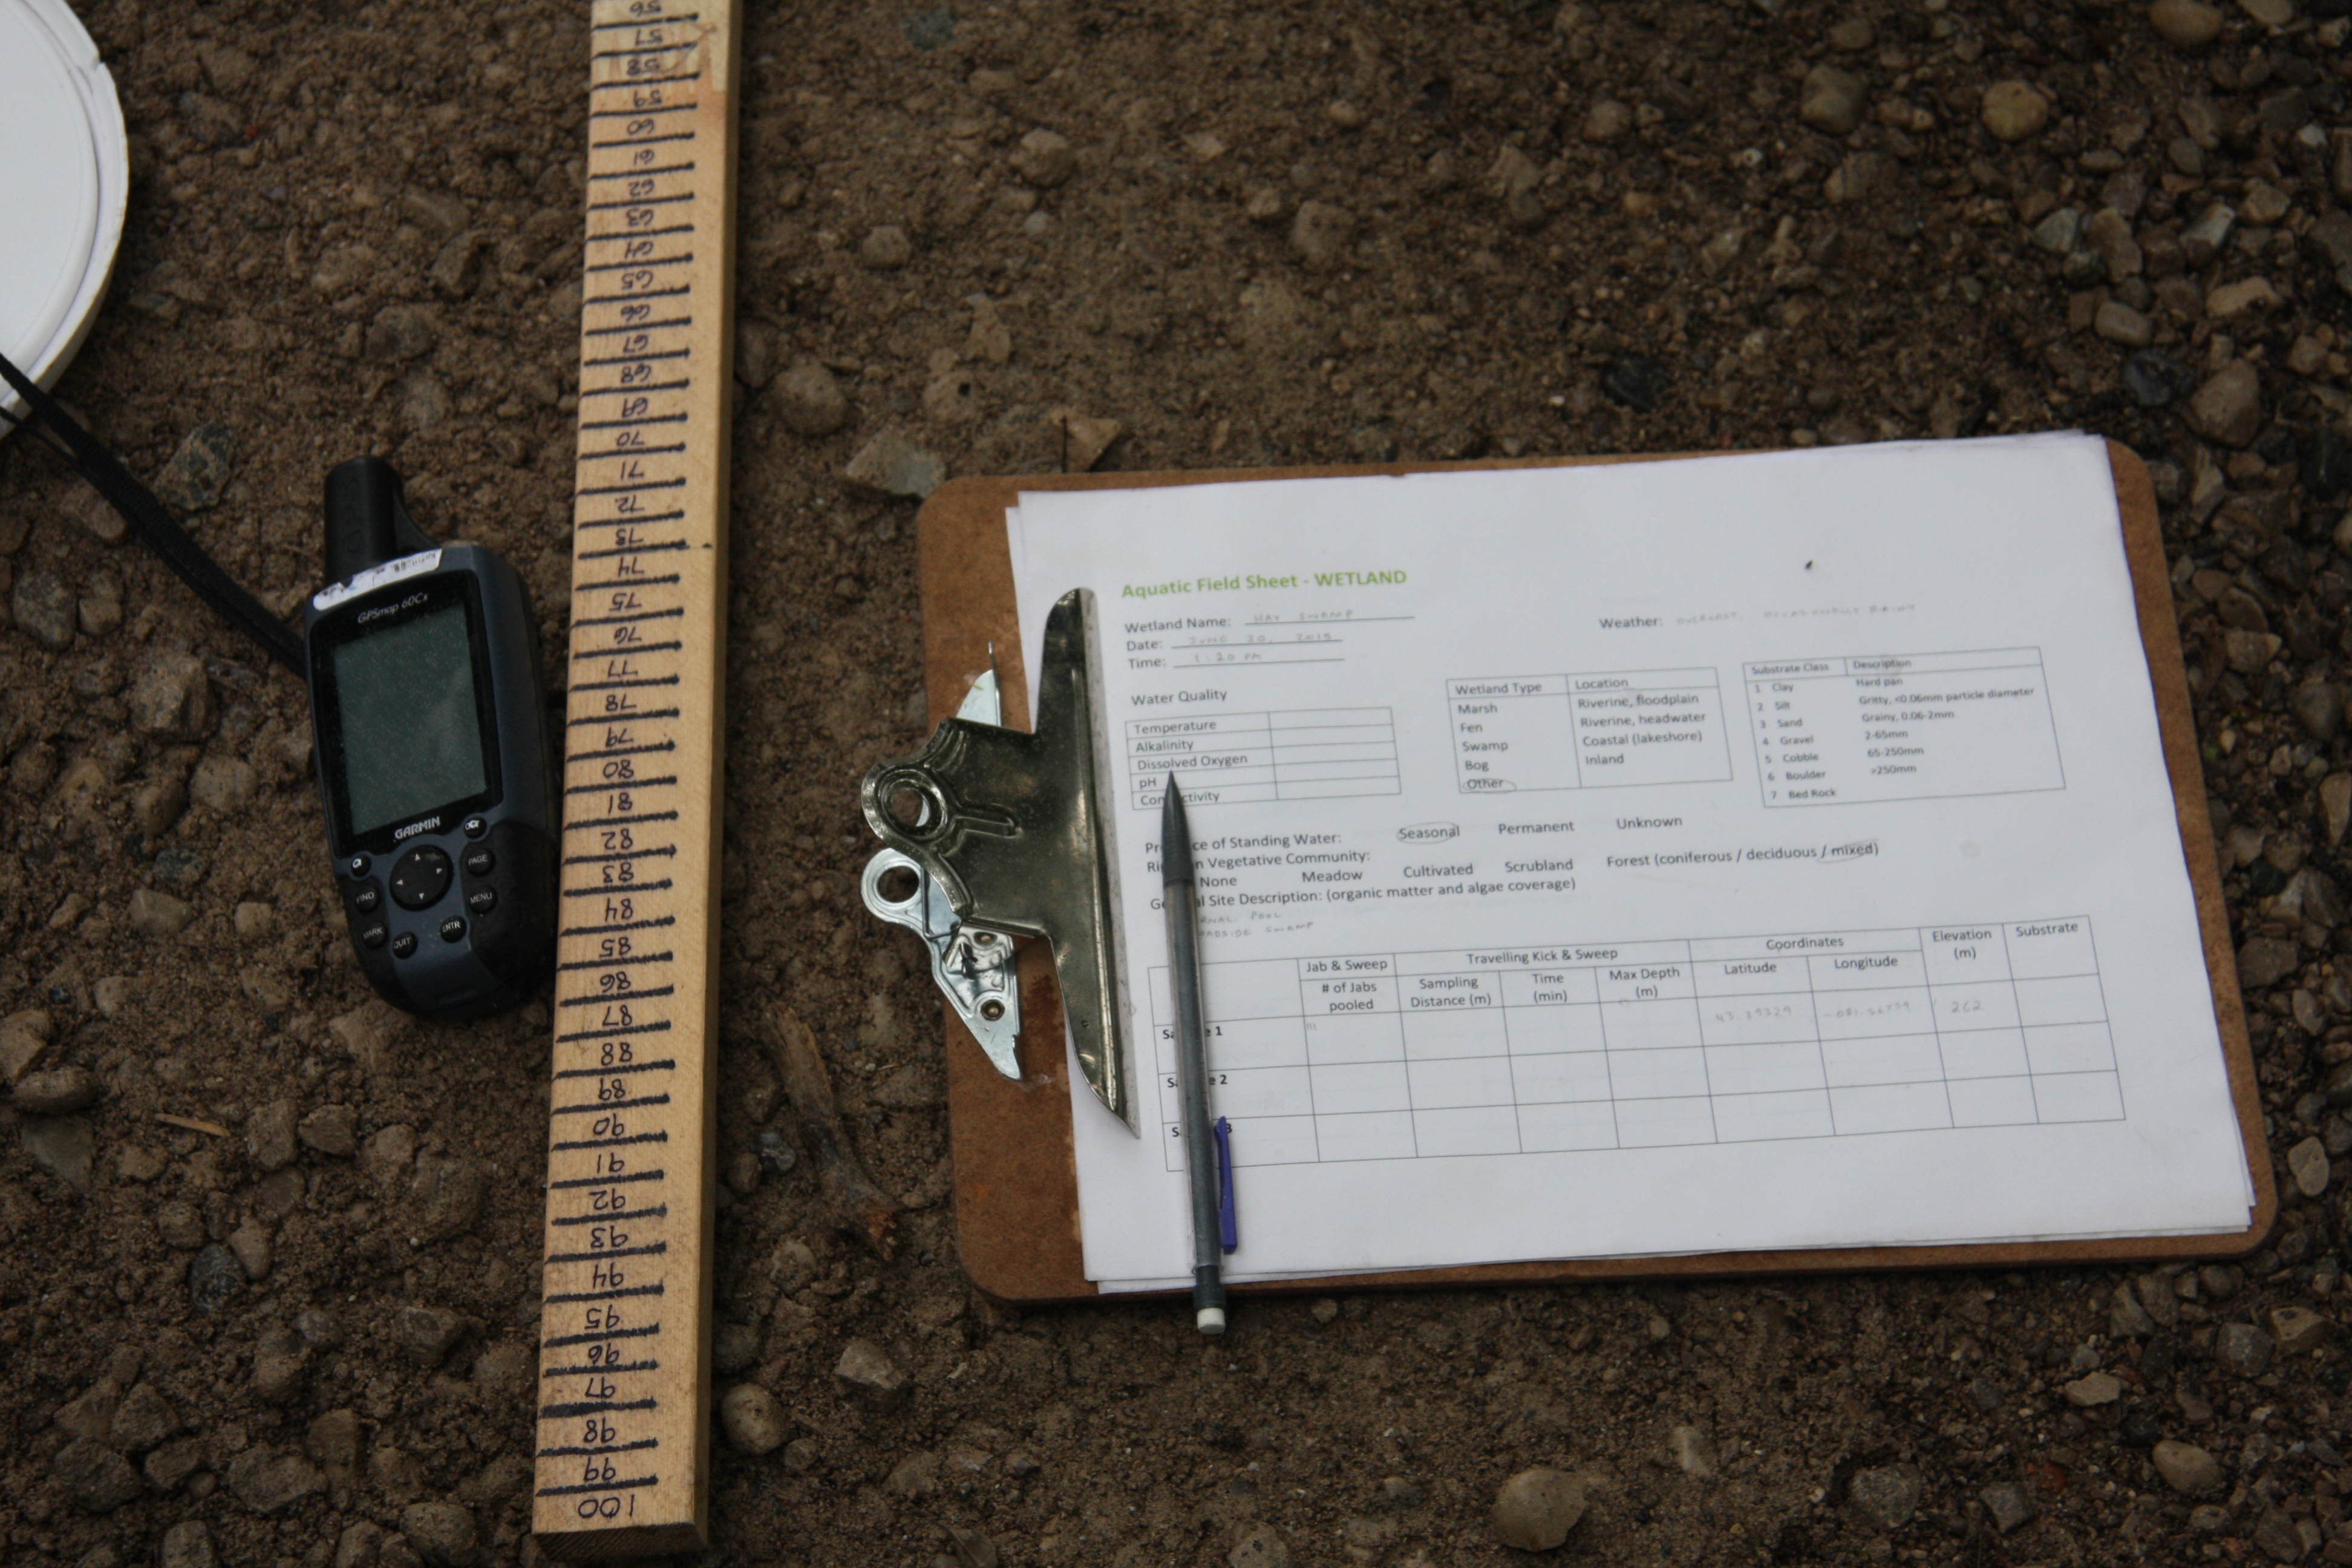 The paper we record our data on (field sheet), GPS unit and meter stick